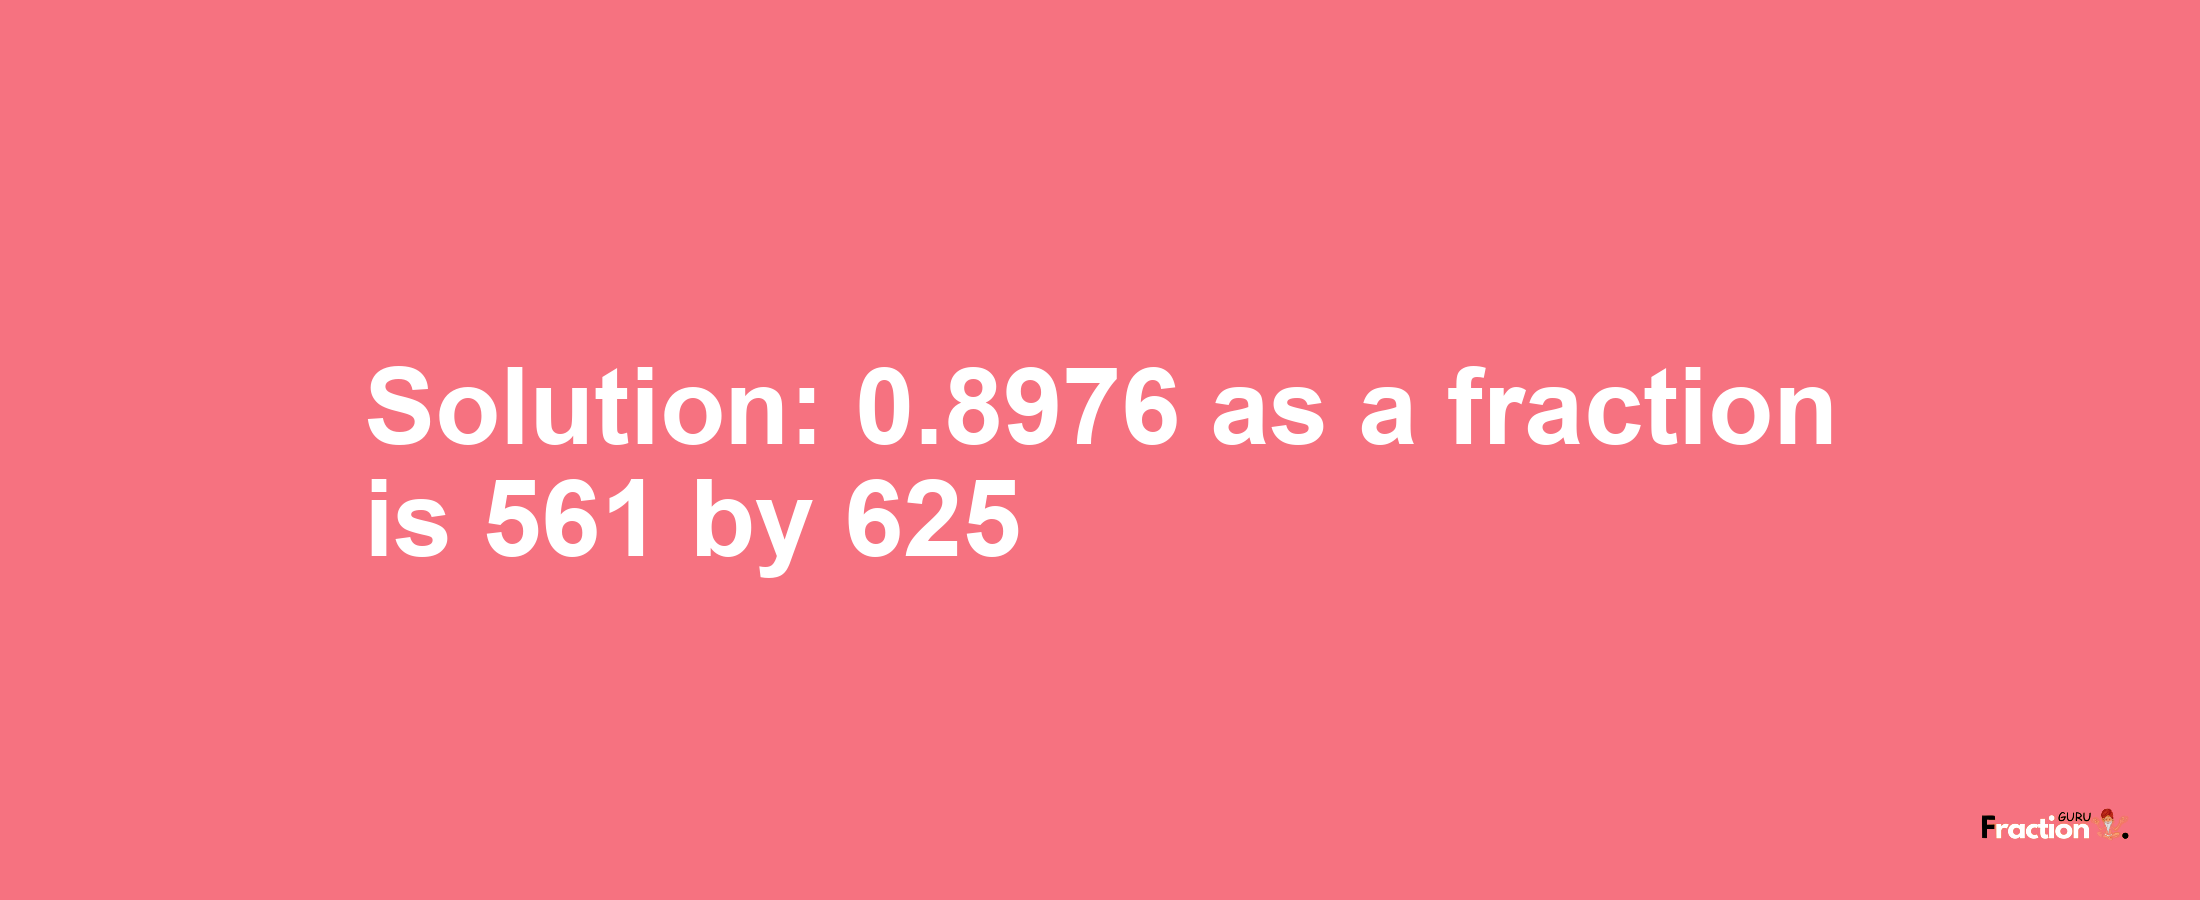 Solution:0.8976 as a fraction is 561/625